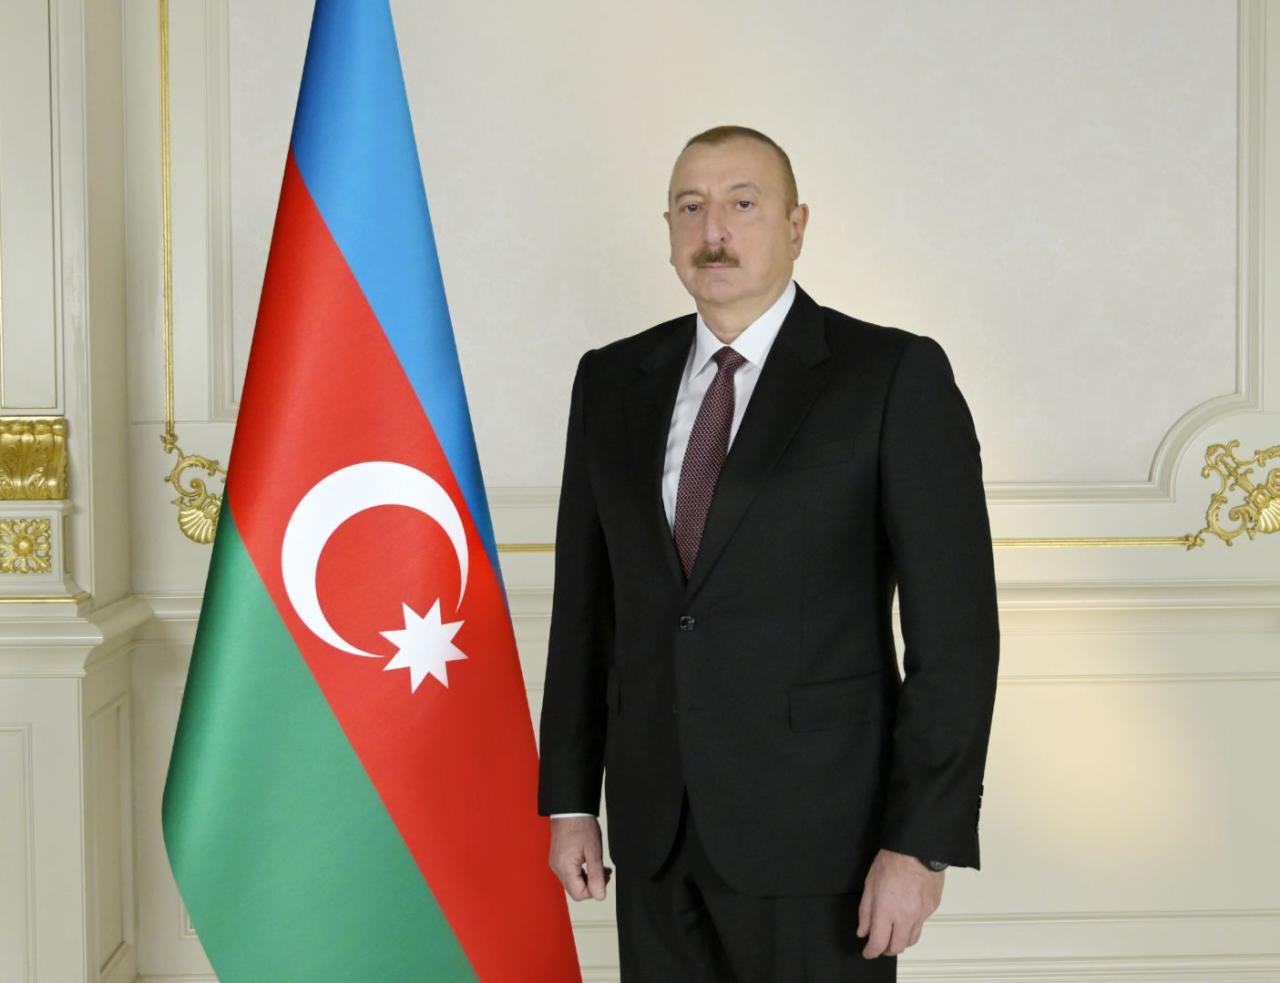 Foreign policy of Azerbaijani president is aimed at victory and dev't